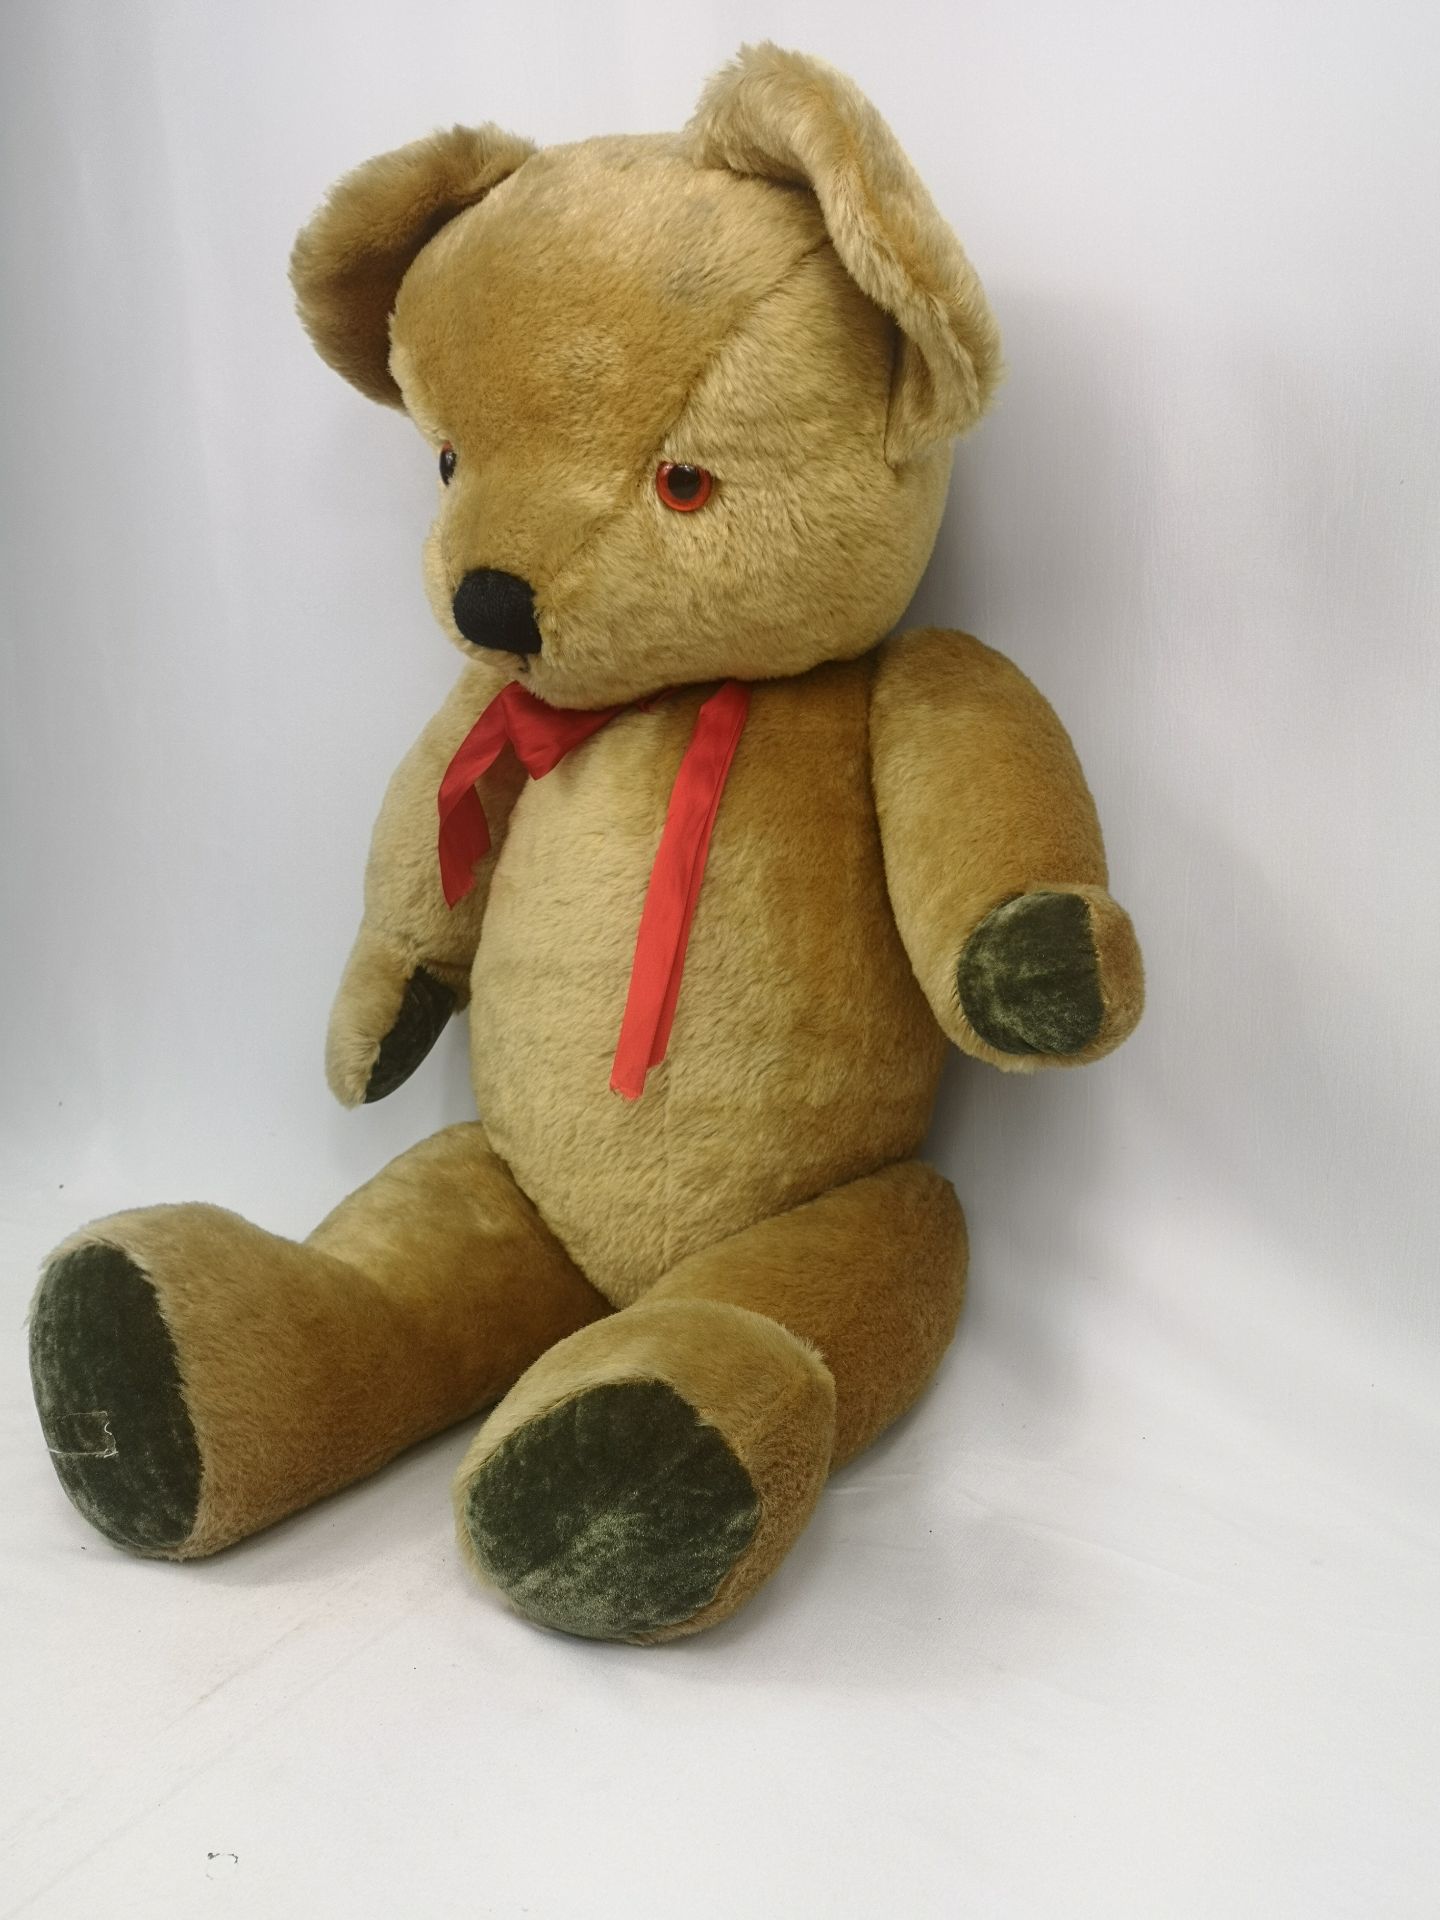 Merrythought teddy bear - Image 2 of 4